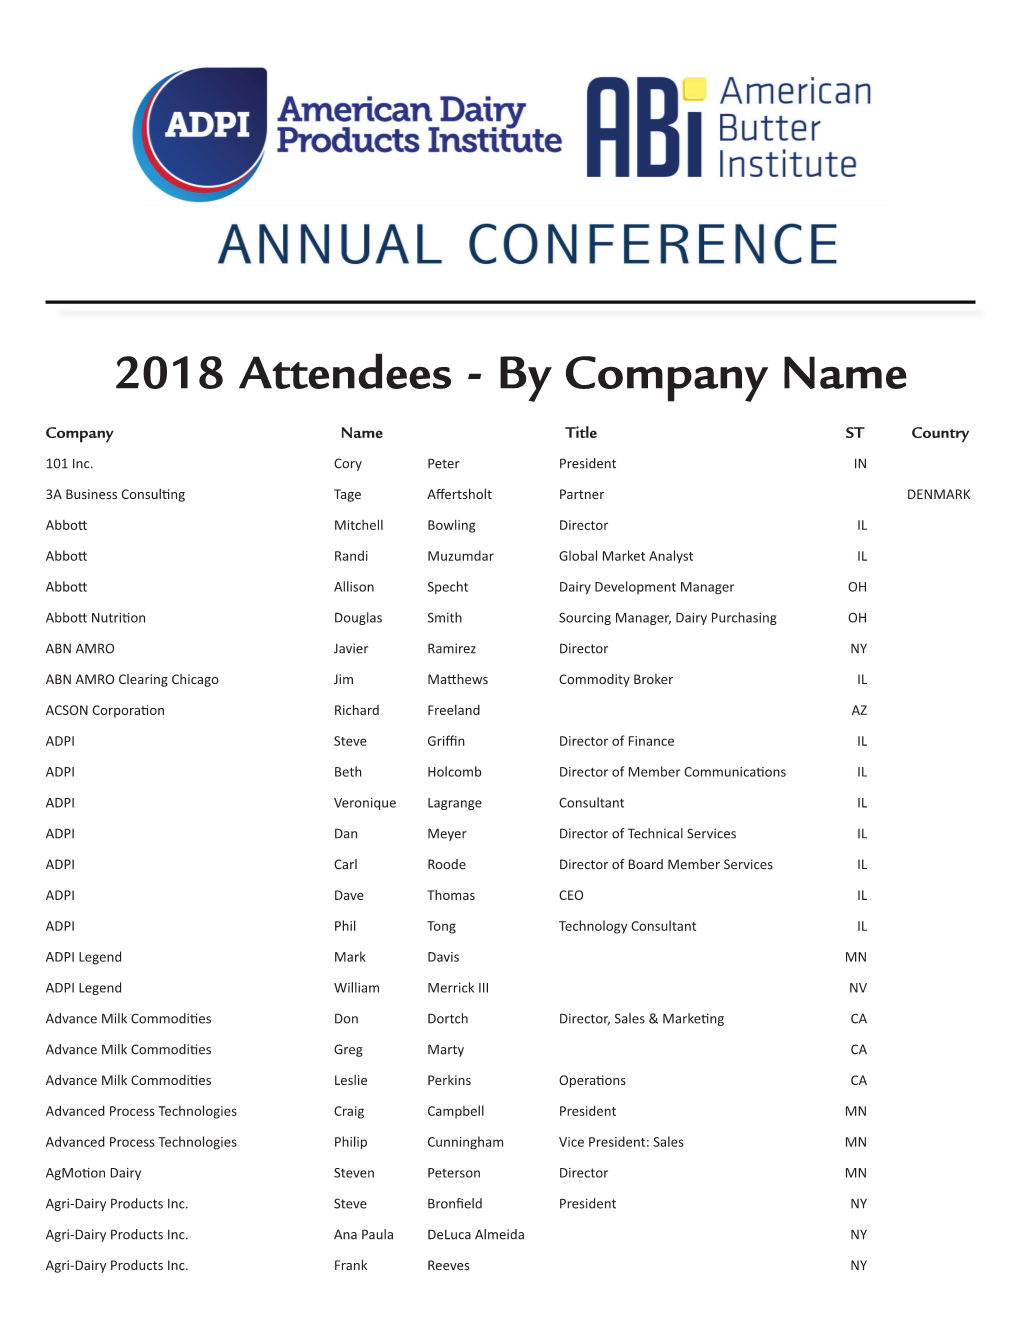 2018 Attendees - by Company Name